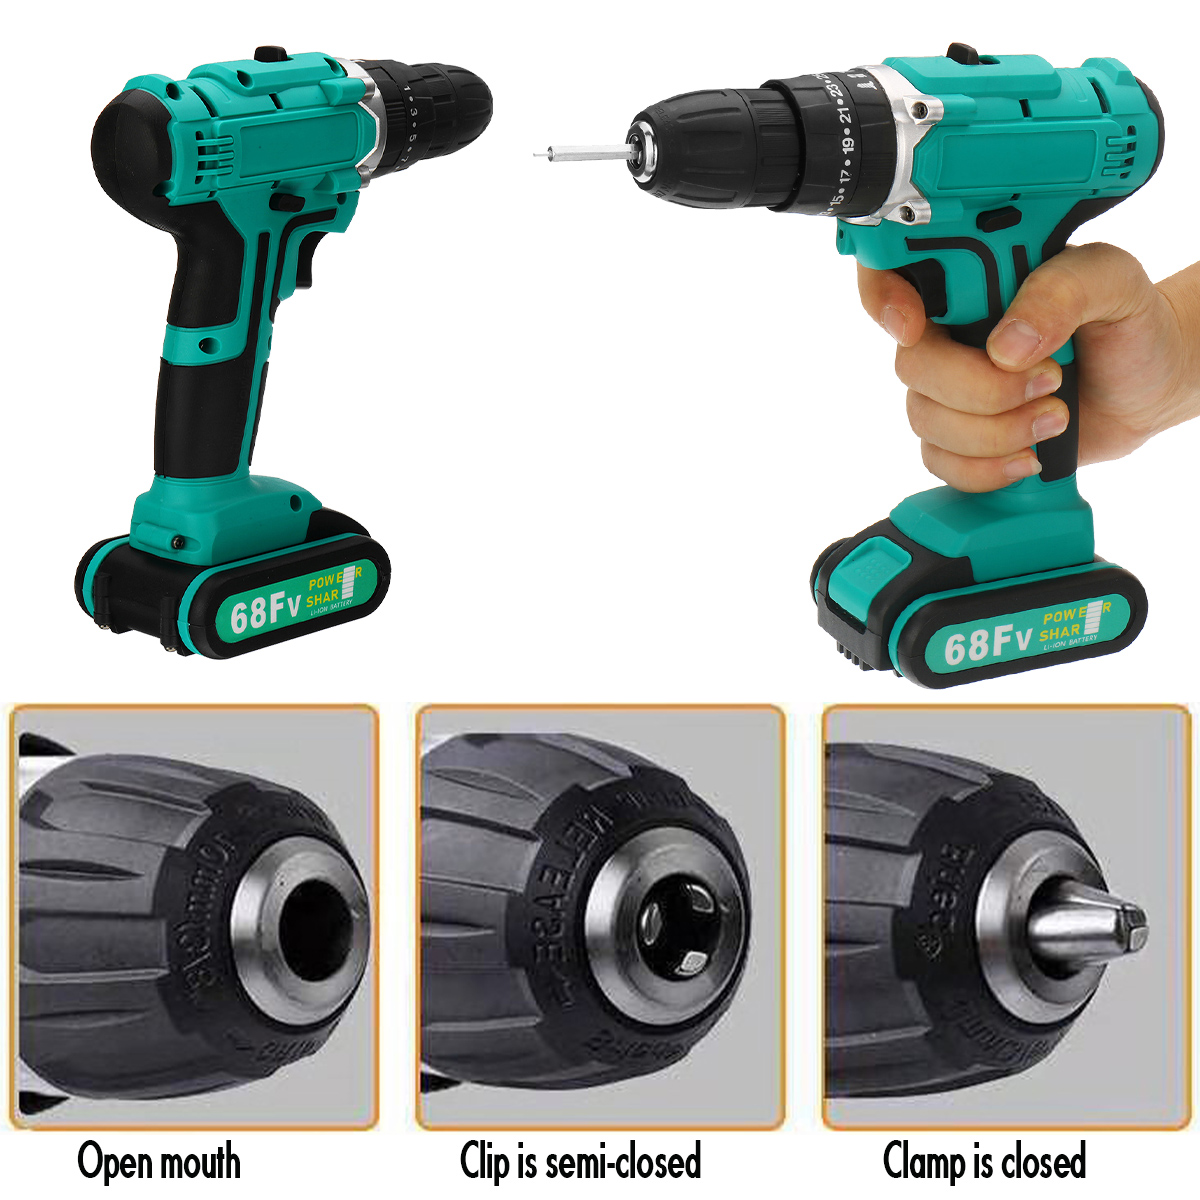 68FV-Household-Lithium-Electric-Screwdriver-2-Speed-Impact-Power-Drills-Rechargeable-Drill-Driver-W--1560586-9